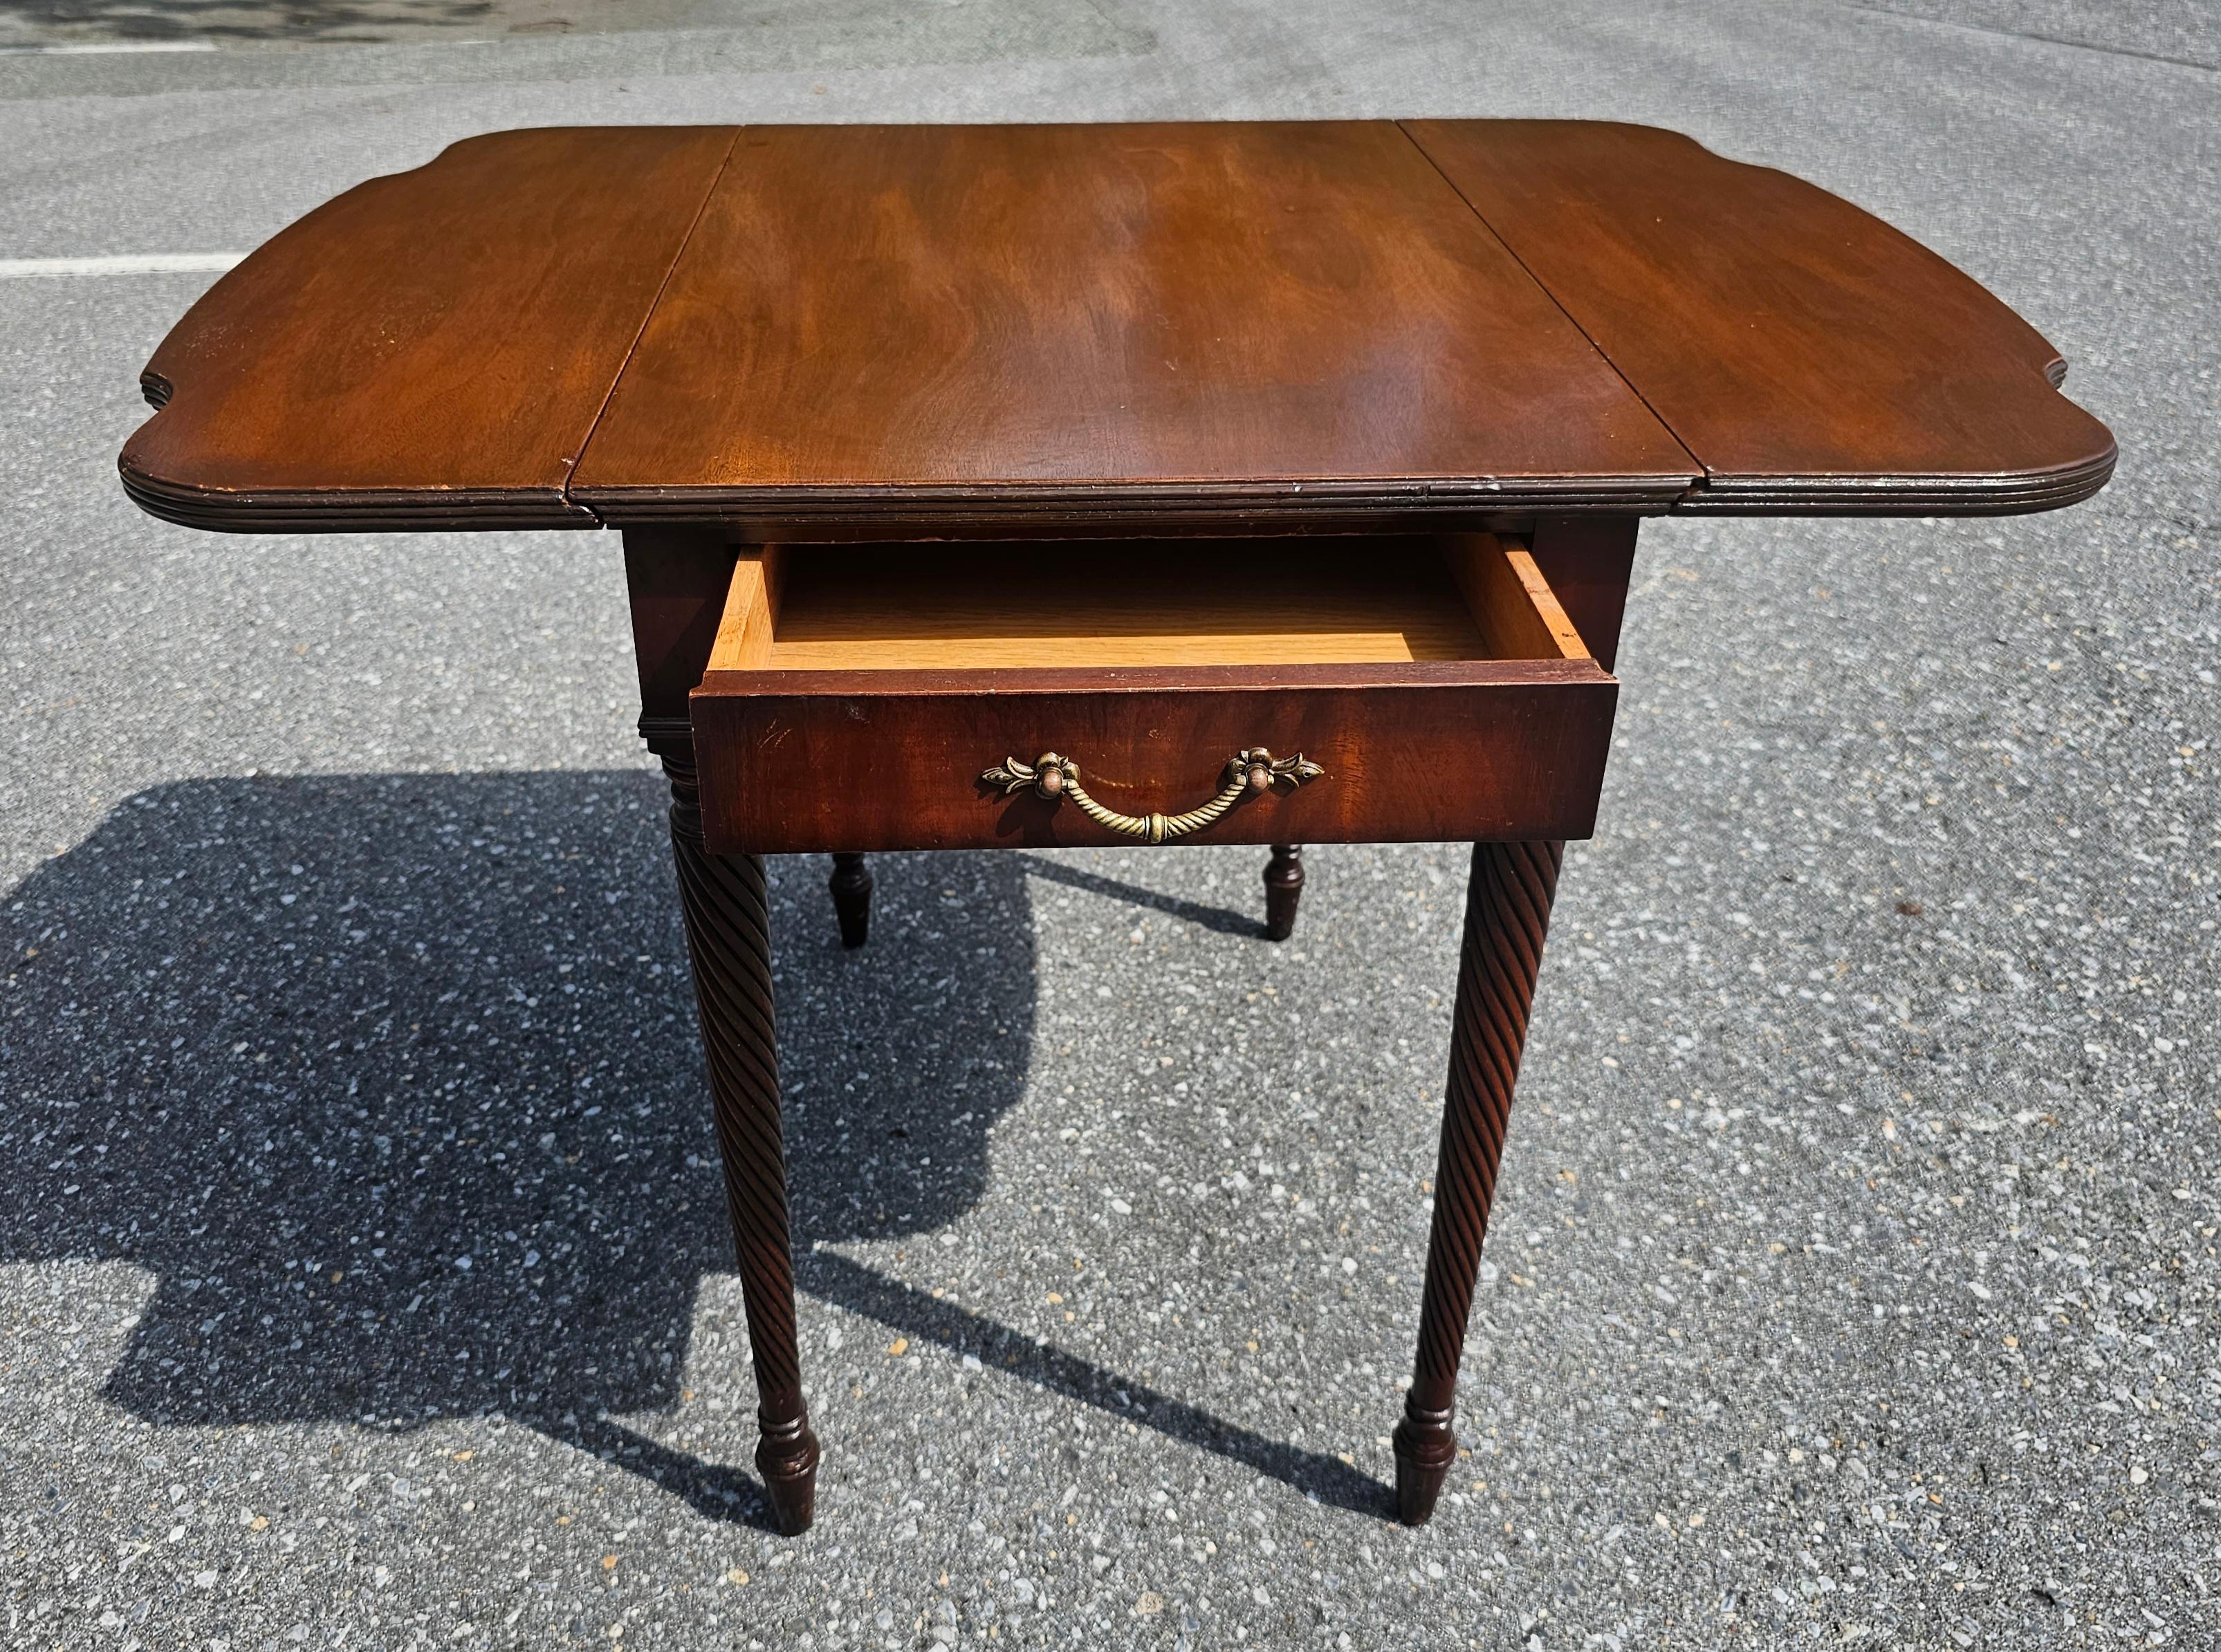 Varnished Early 20th C. Imperial Grand Rapids Mid Century Mahogany Pembroke Table For Sale